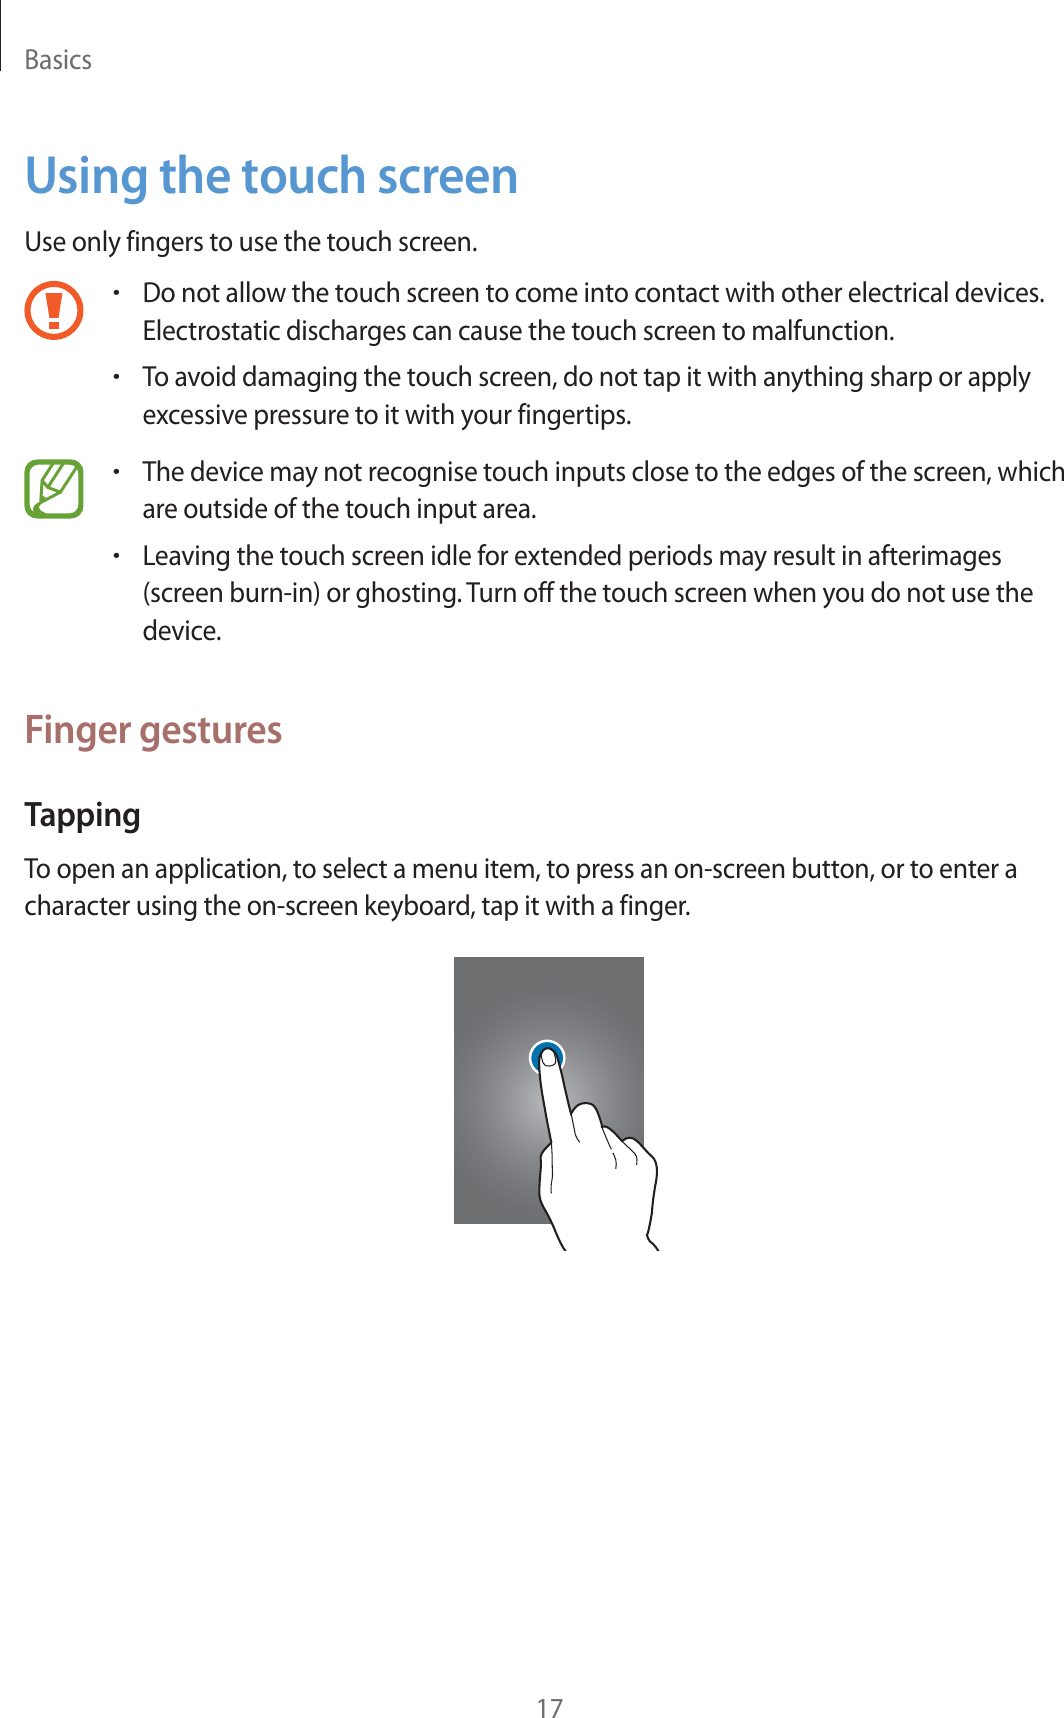 Basics17Using the touch screenUse only fingers to use the touch screen.rDo not allow the touch screen to come into contact with other electrical devices. Electrostatic discharges can cause the touch screen to malfunction.rTo avoid damaging the touch screen, do not tap it with anything sharp or apply excessive pressure to it with your fingertips.rThe device may not recognise touch inputs close to the edges of the screen, which are outside of the touch input area.rLeaving the touch screen idle for extended periods may result in afterimages (screen burn-in) or ghosting. Turn off the touch screen when you do not use the device.Finger gesturesTappingTo open an application, to select a menu item, to press an on-screen button, or to enter a character using the on-screen keyboard, tap it with a finger.